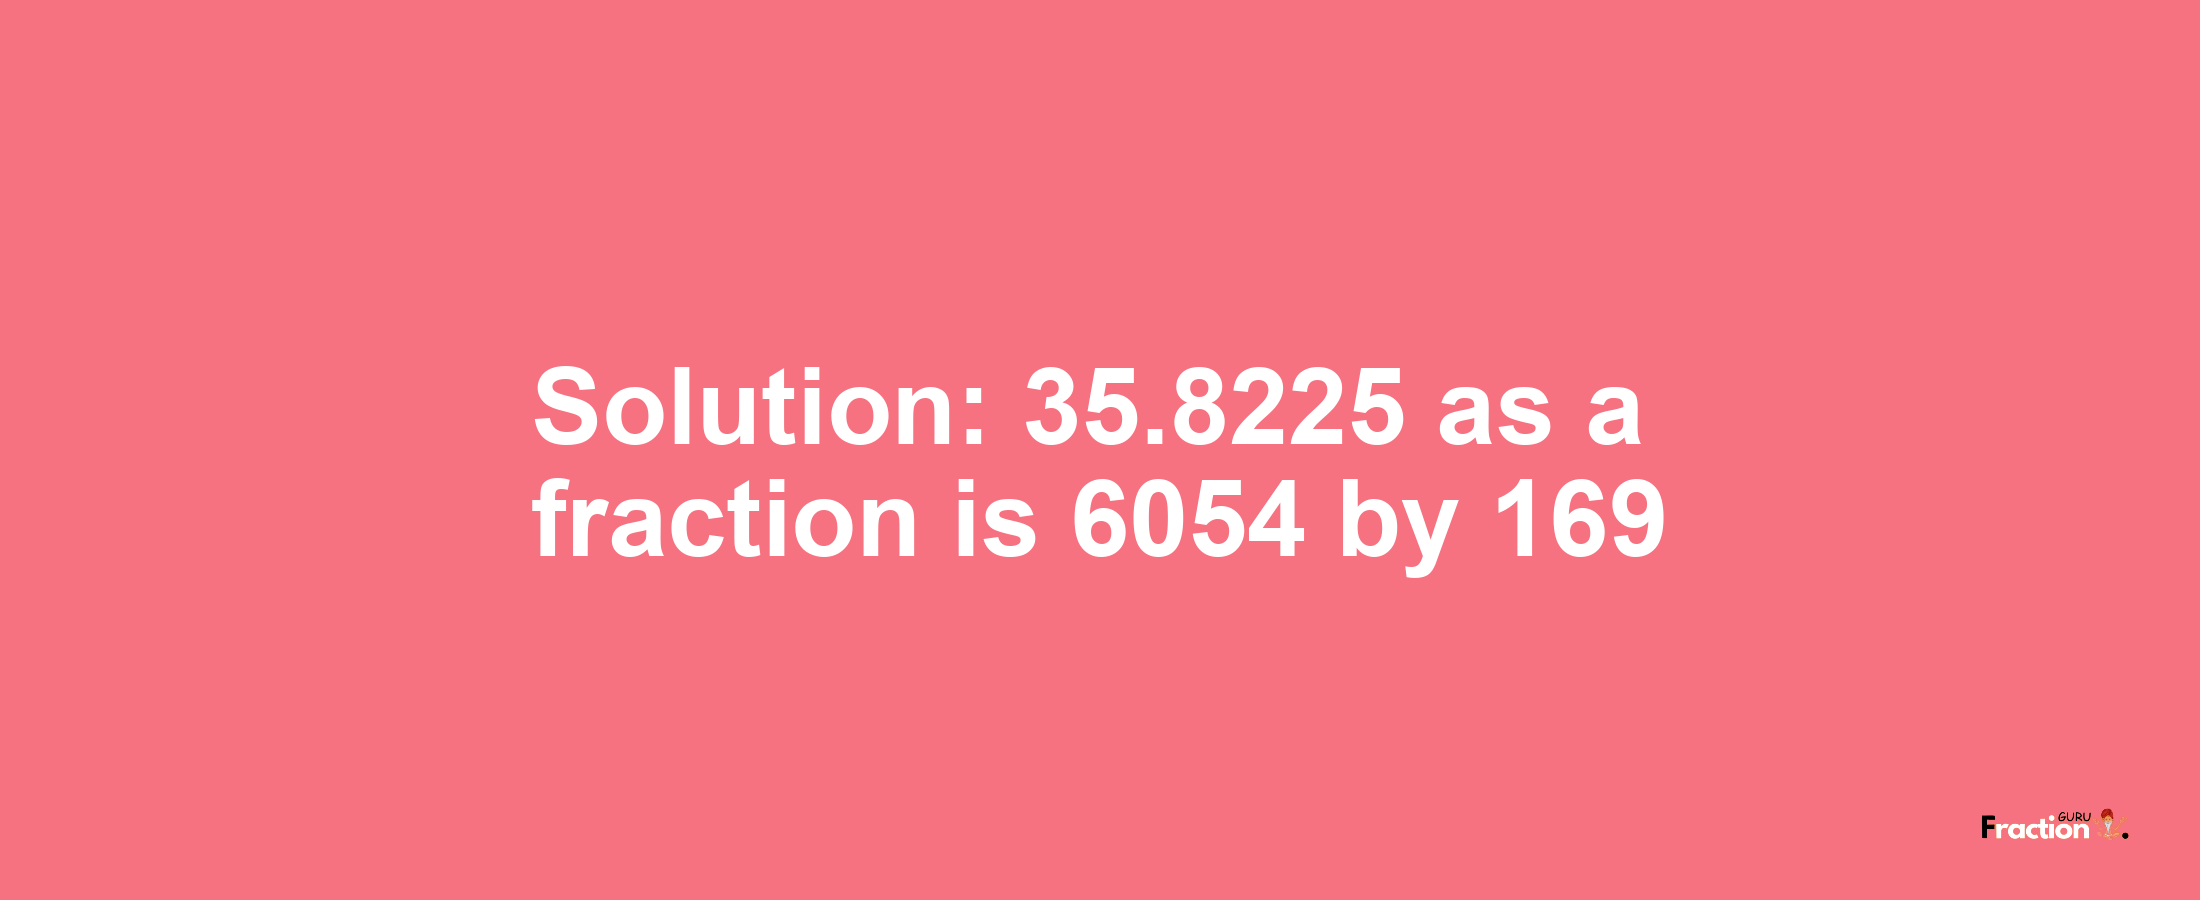 Solution:35.8225 as a fraction is 6054/169